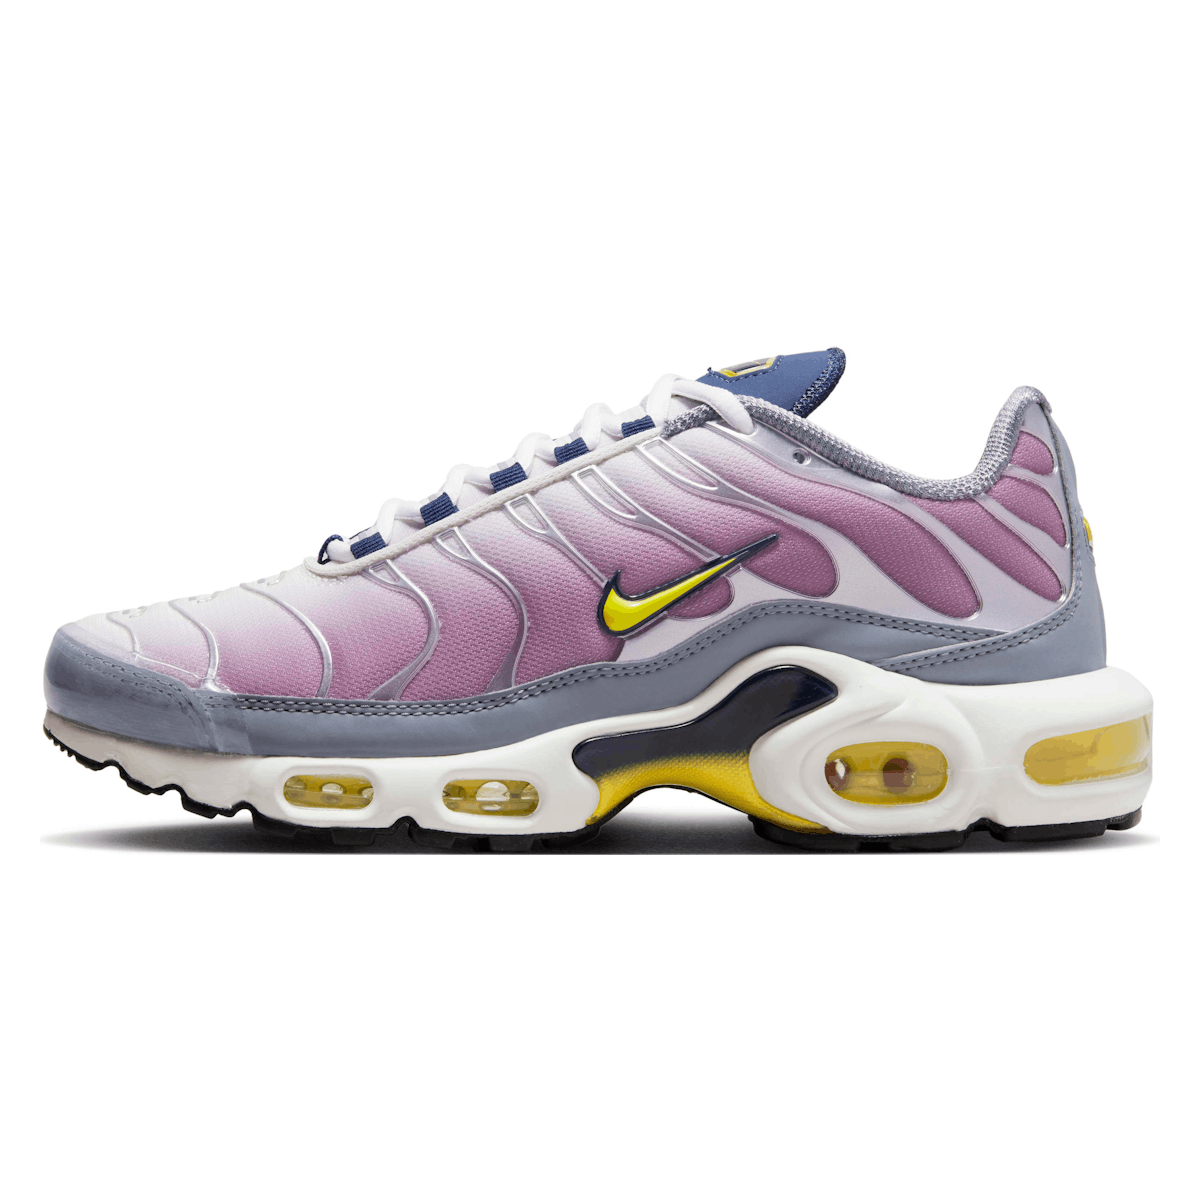 Nike Air Max Plus Wmns "Violet Dust and High Voltage"